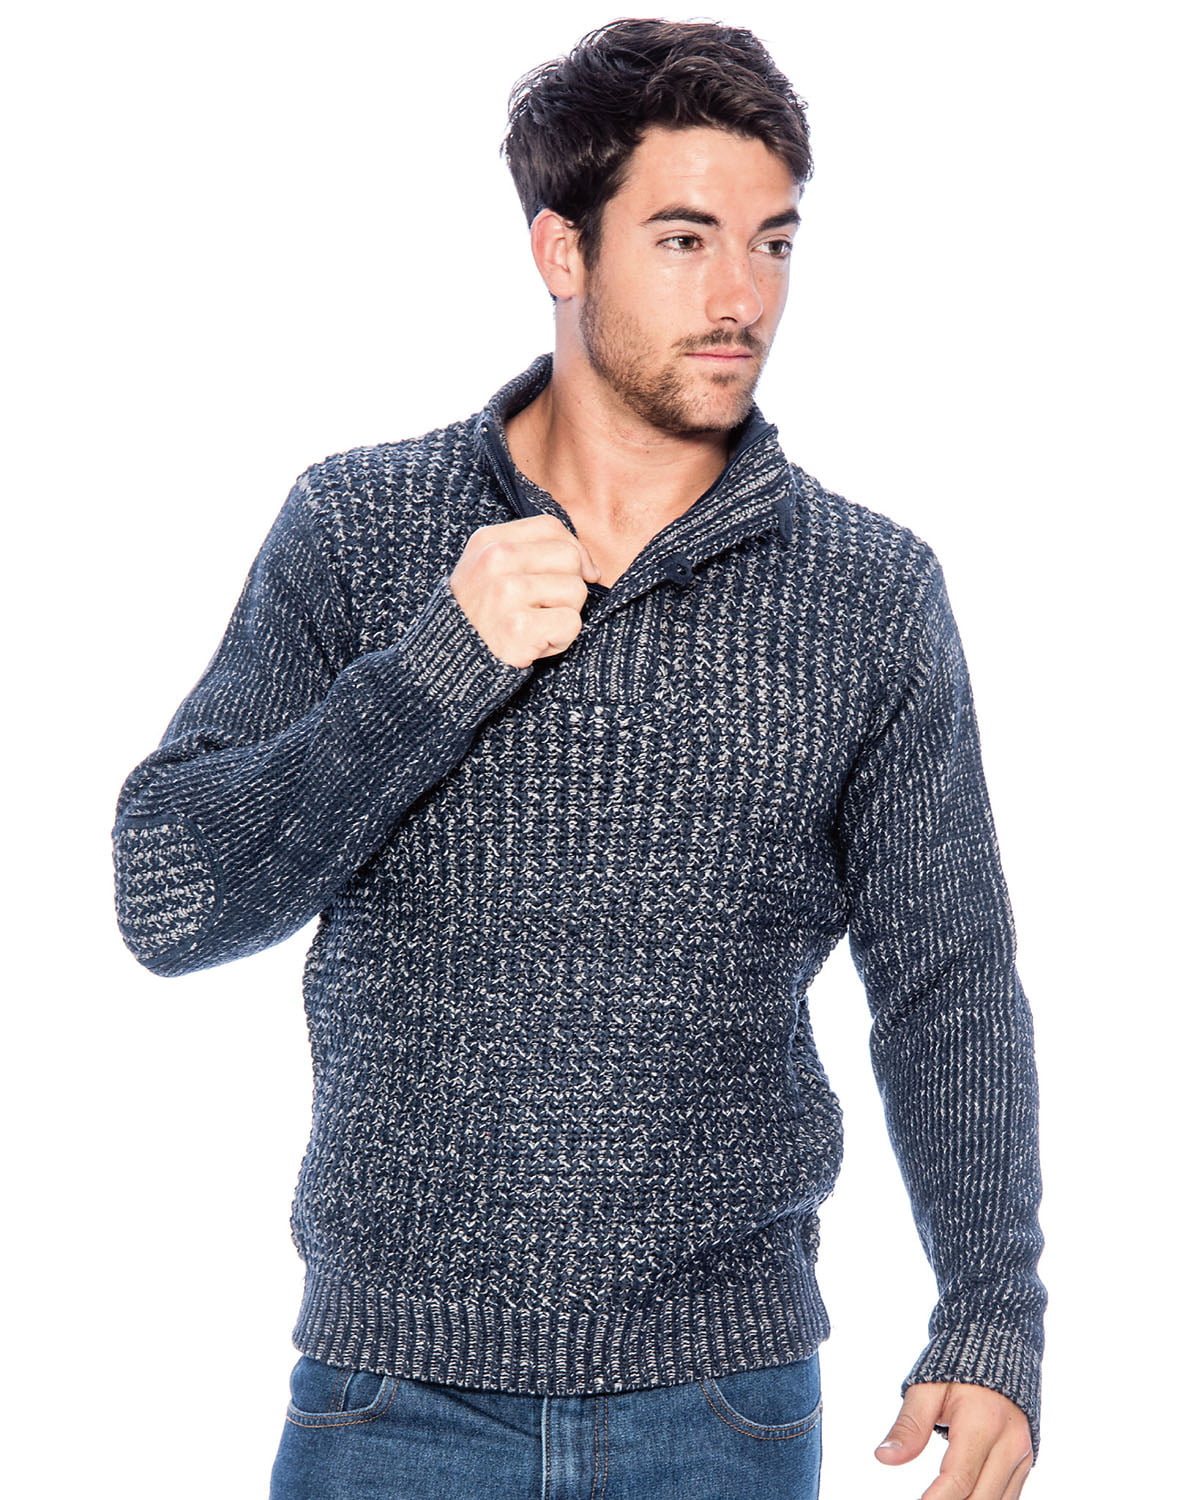 TR Men's Check Rib Sweater with Zip Collar by 9 Crowns Essentials (Navy ...